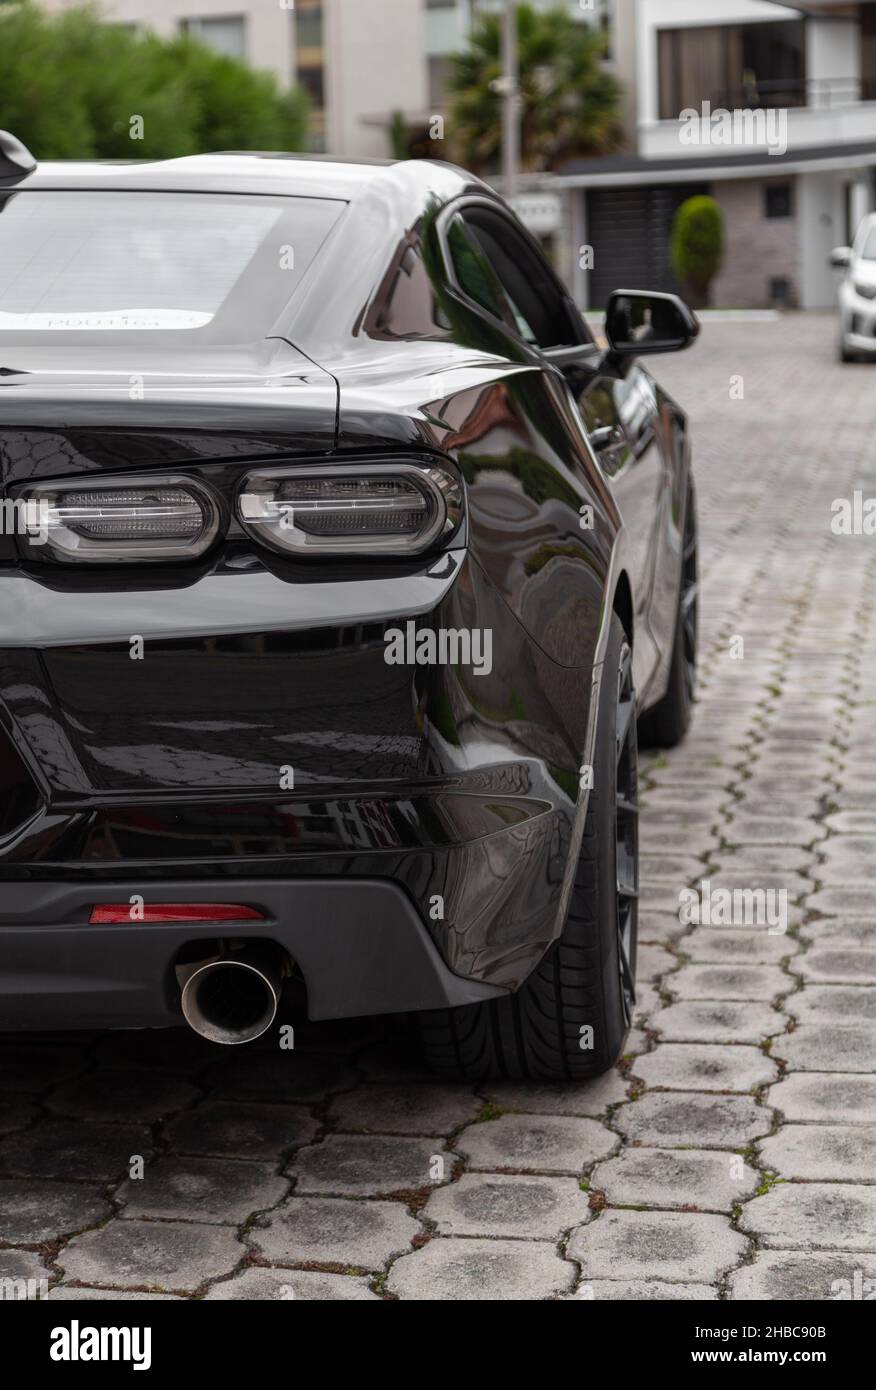 details of the rear of a black sports car, showing the exhaust pipe and taillights, means of transport in the city, lifestyle in the city Stock Photo